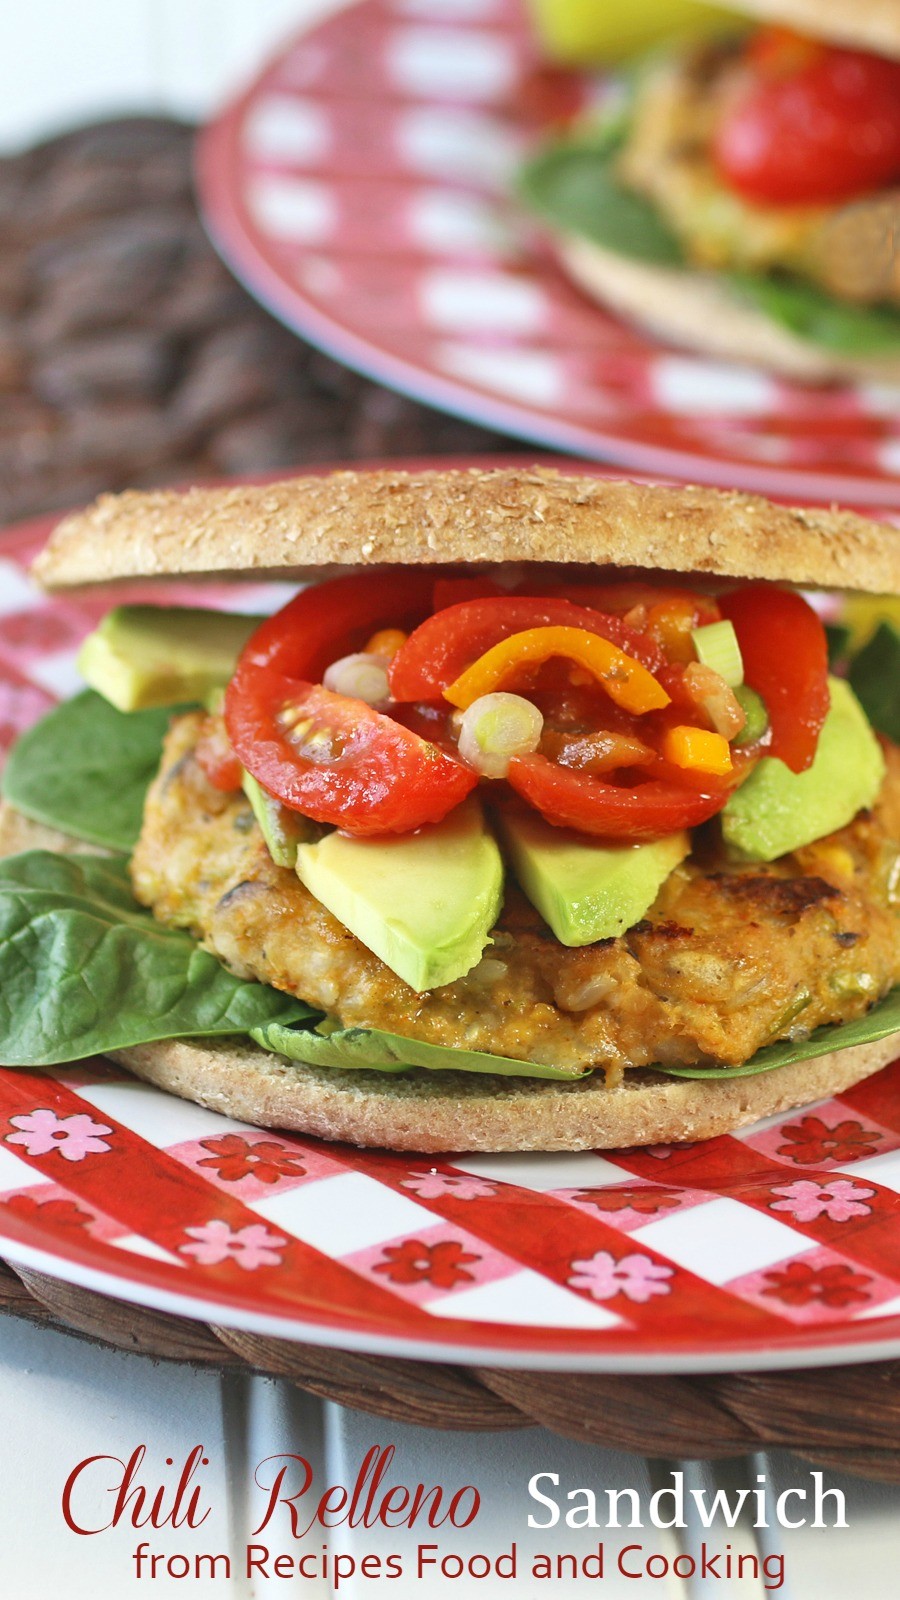 Boca Chile Relleno Patty on Whole Wheat Bagel Thins with Spinach, Avocado and Fresh Salsa